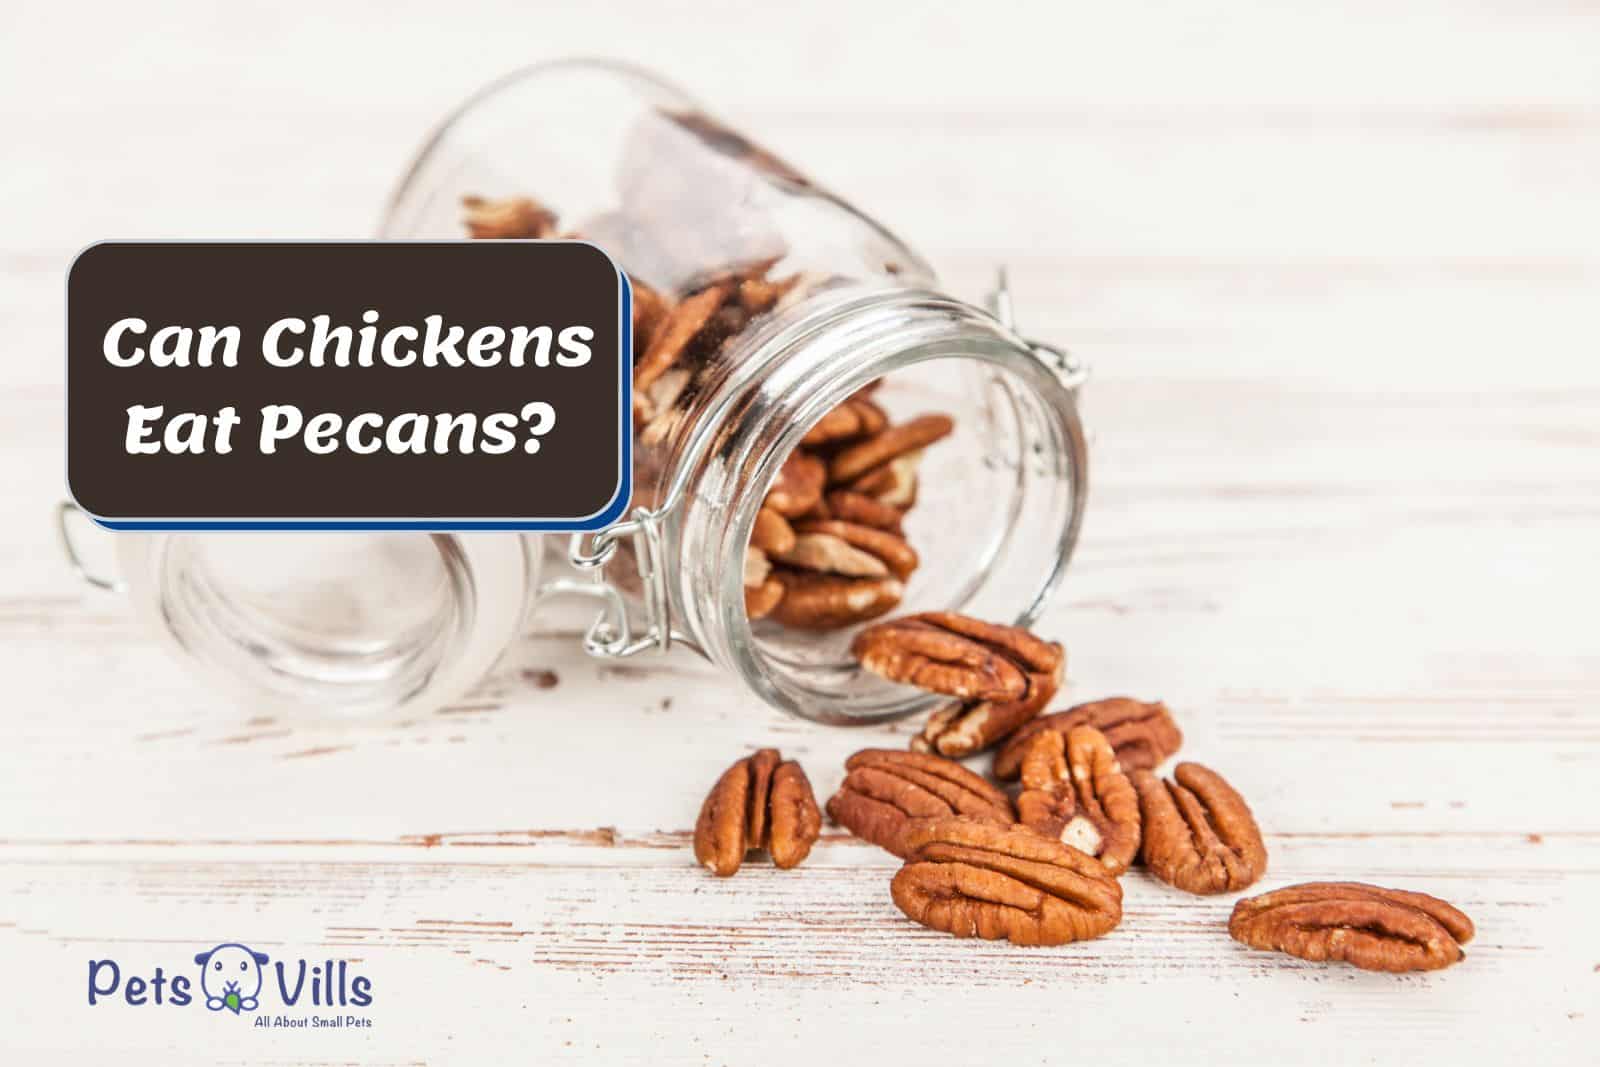 pecans from the mason jar but Can chickens eat pecans?